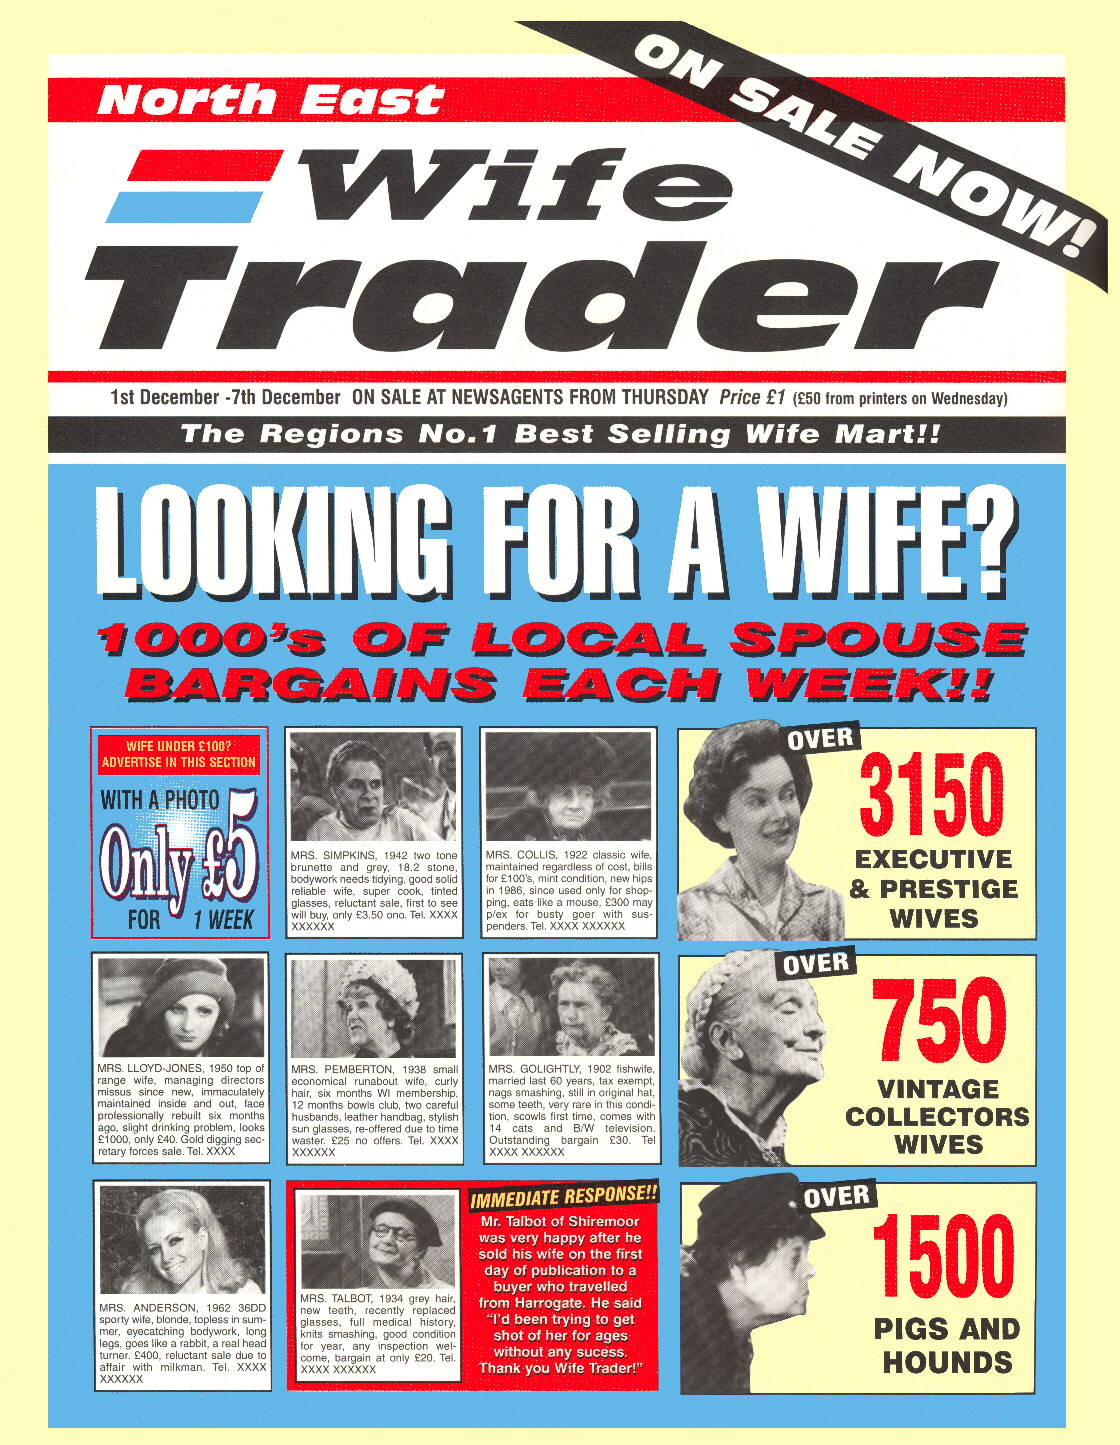 A parody of magazines like Autotrader, selling used cars via classified ads. Instead, this is the cover of a magazine called Wife Trader, with thousands of local spouse bargains each week! The image was scanned from ‘The Joy of Sexism.’ It features wives ranging from Mrs. Simpkins, a ‘good solid reliable wife’ at £3.50 (or near offer) to Mrs. Anderson, ‘a real head-turner, reluctant sale due to affair with milkman’ at £400.